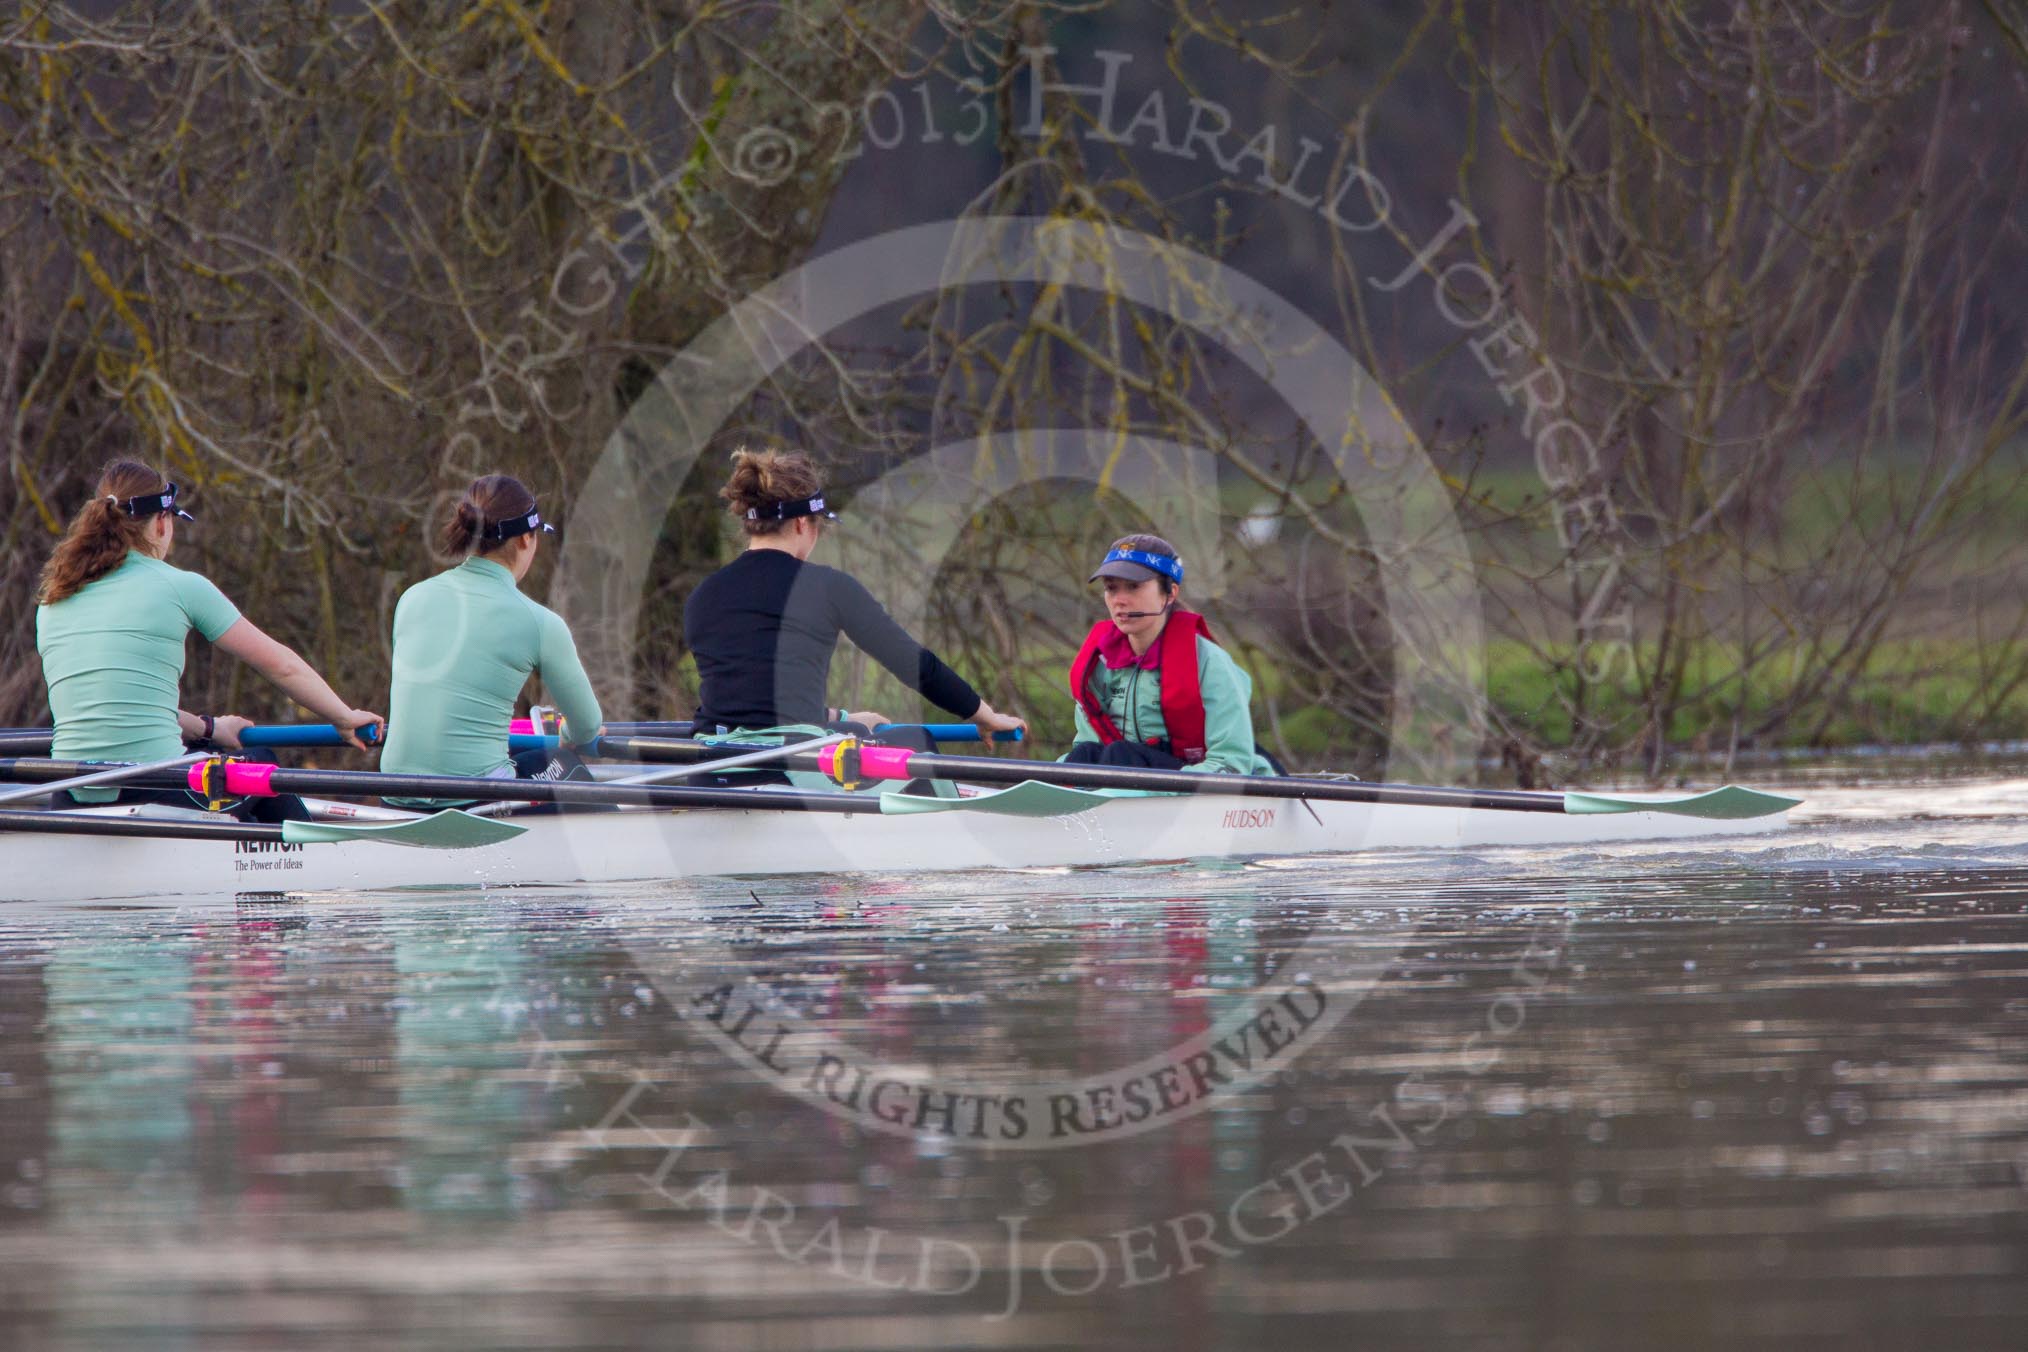 The Boat Race season 2013 - CUWBC training: The CUWBC Blue Boat on the way back from Temple Island to Henley: In the 5 seat Sara Lackner, 6 Helena Schofield, 7 Christine Seeliger, stroke Katie-Jane Whitlock, and cox Arav Gupta..
River Thames near Remenham,
Henley-on-Thames,
Oxfordshire,
United Kingdom,
on 19 March 2013 at 15:39, image #59